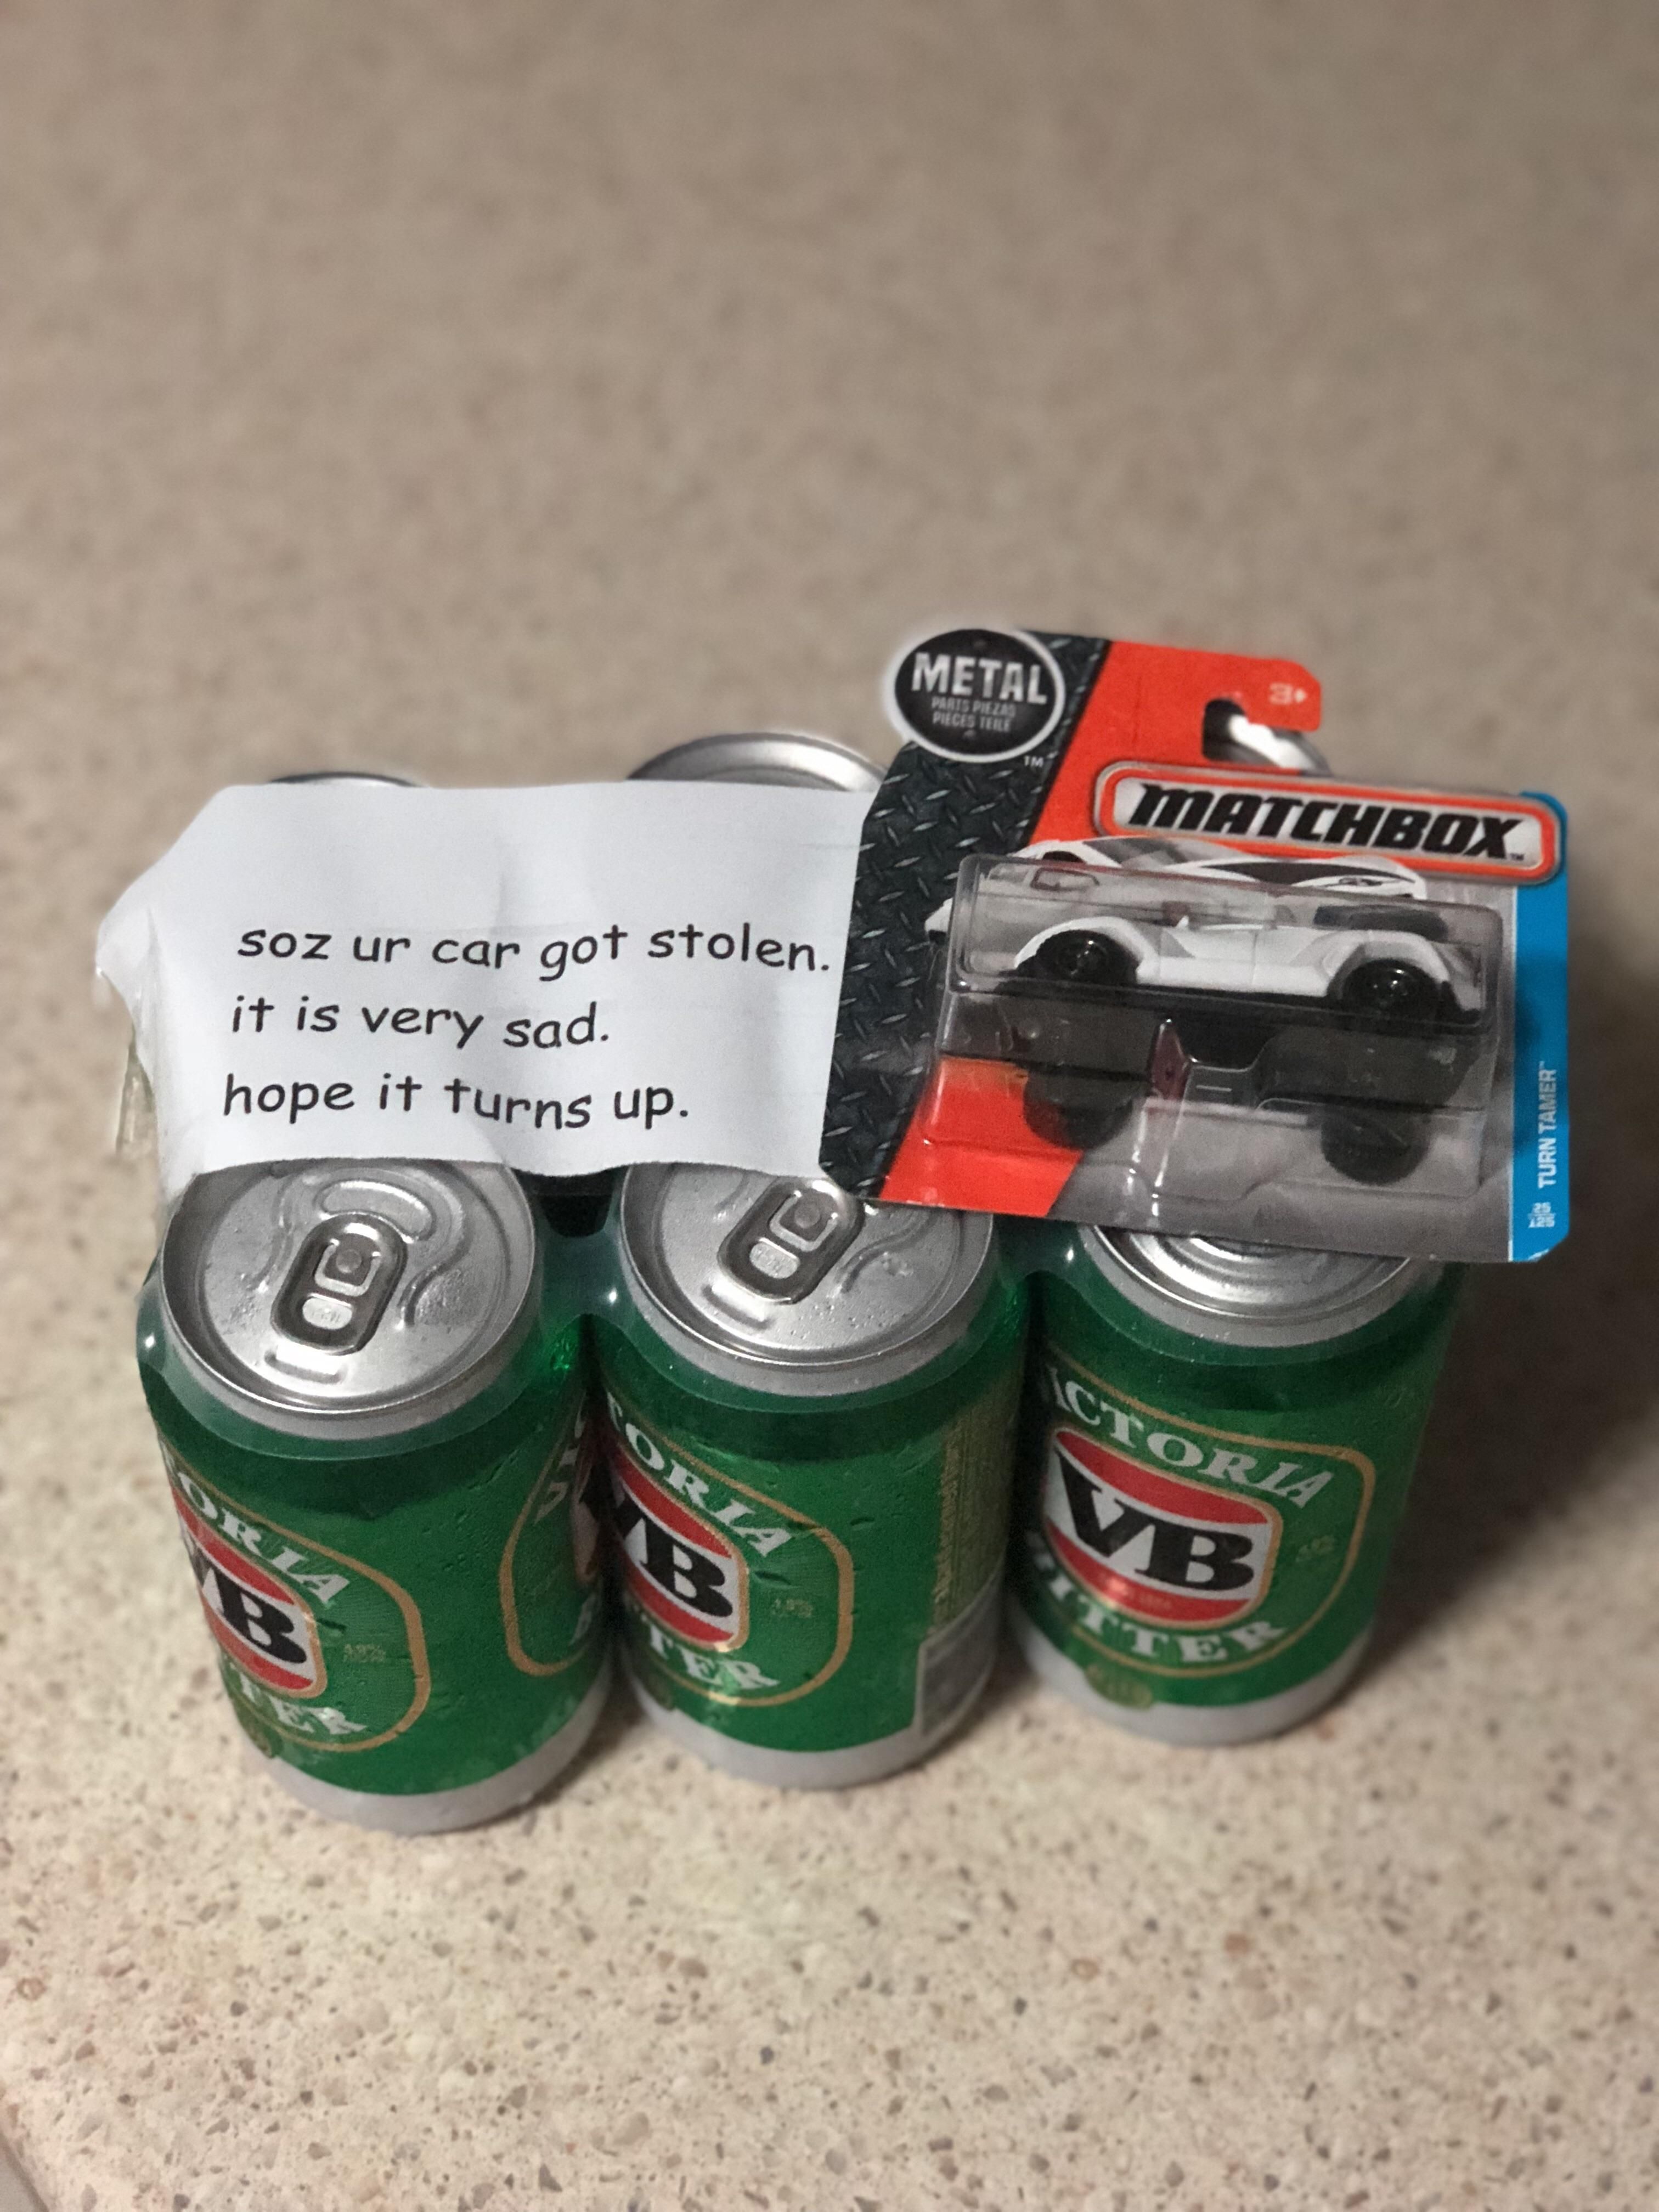 When your car gets stolen so your mate comes around with gifts to make you feel better.